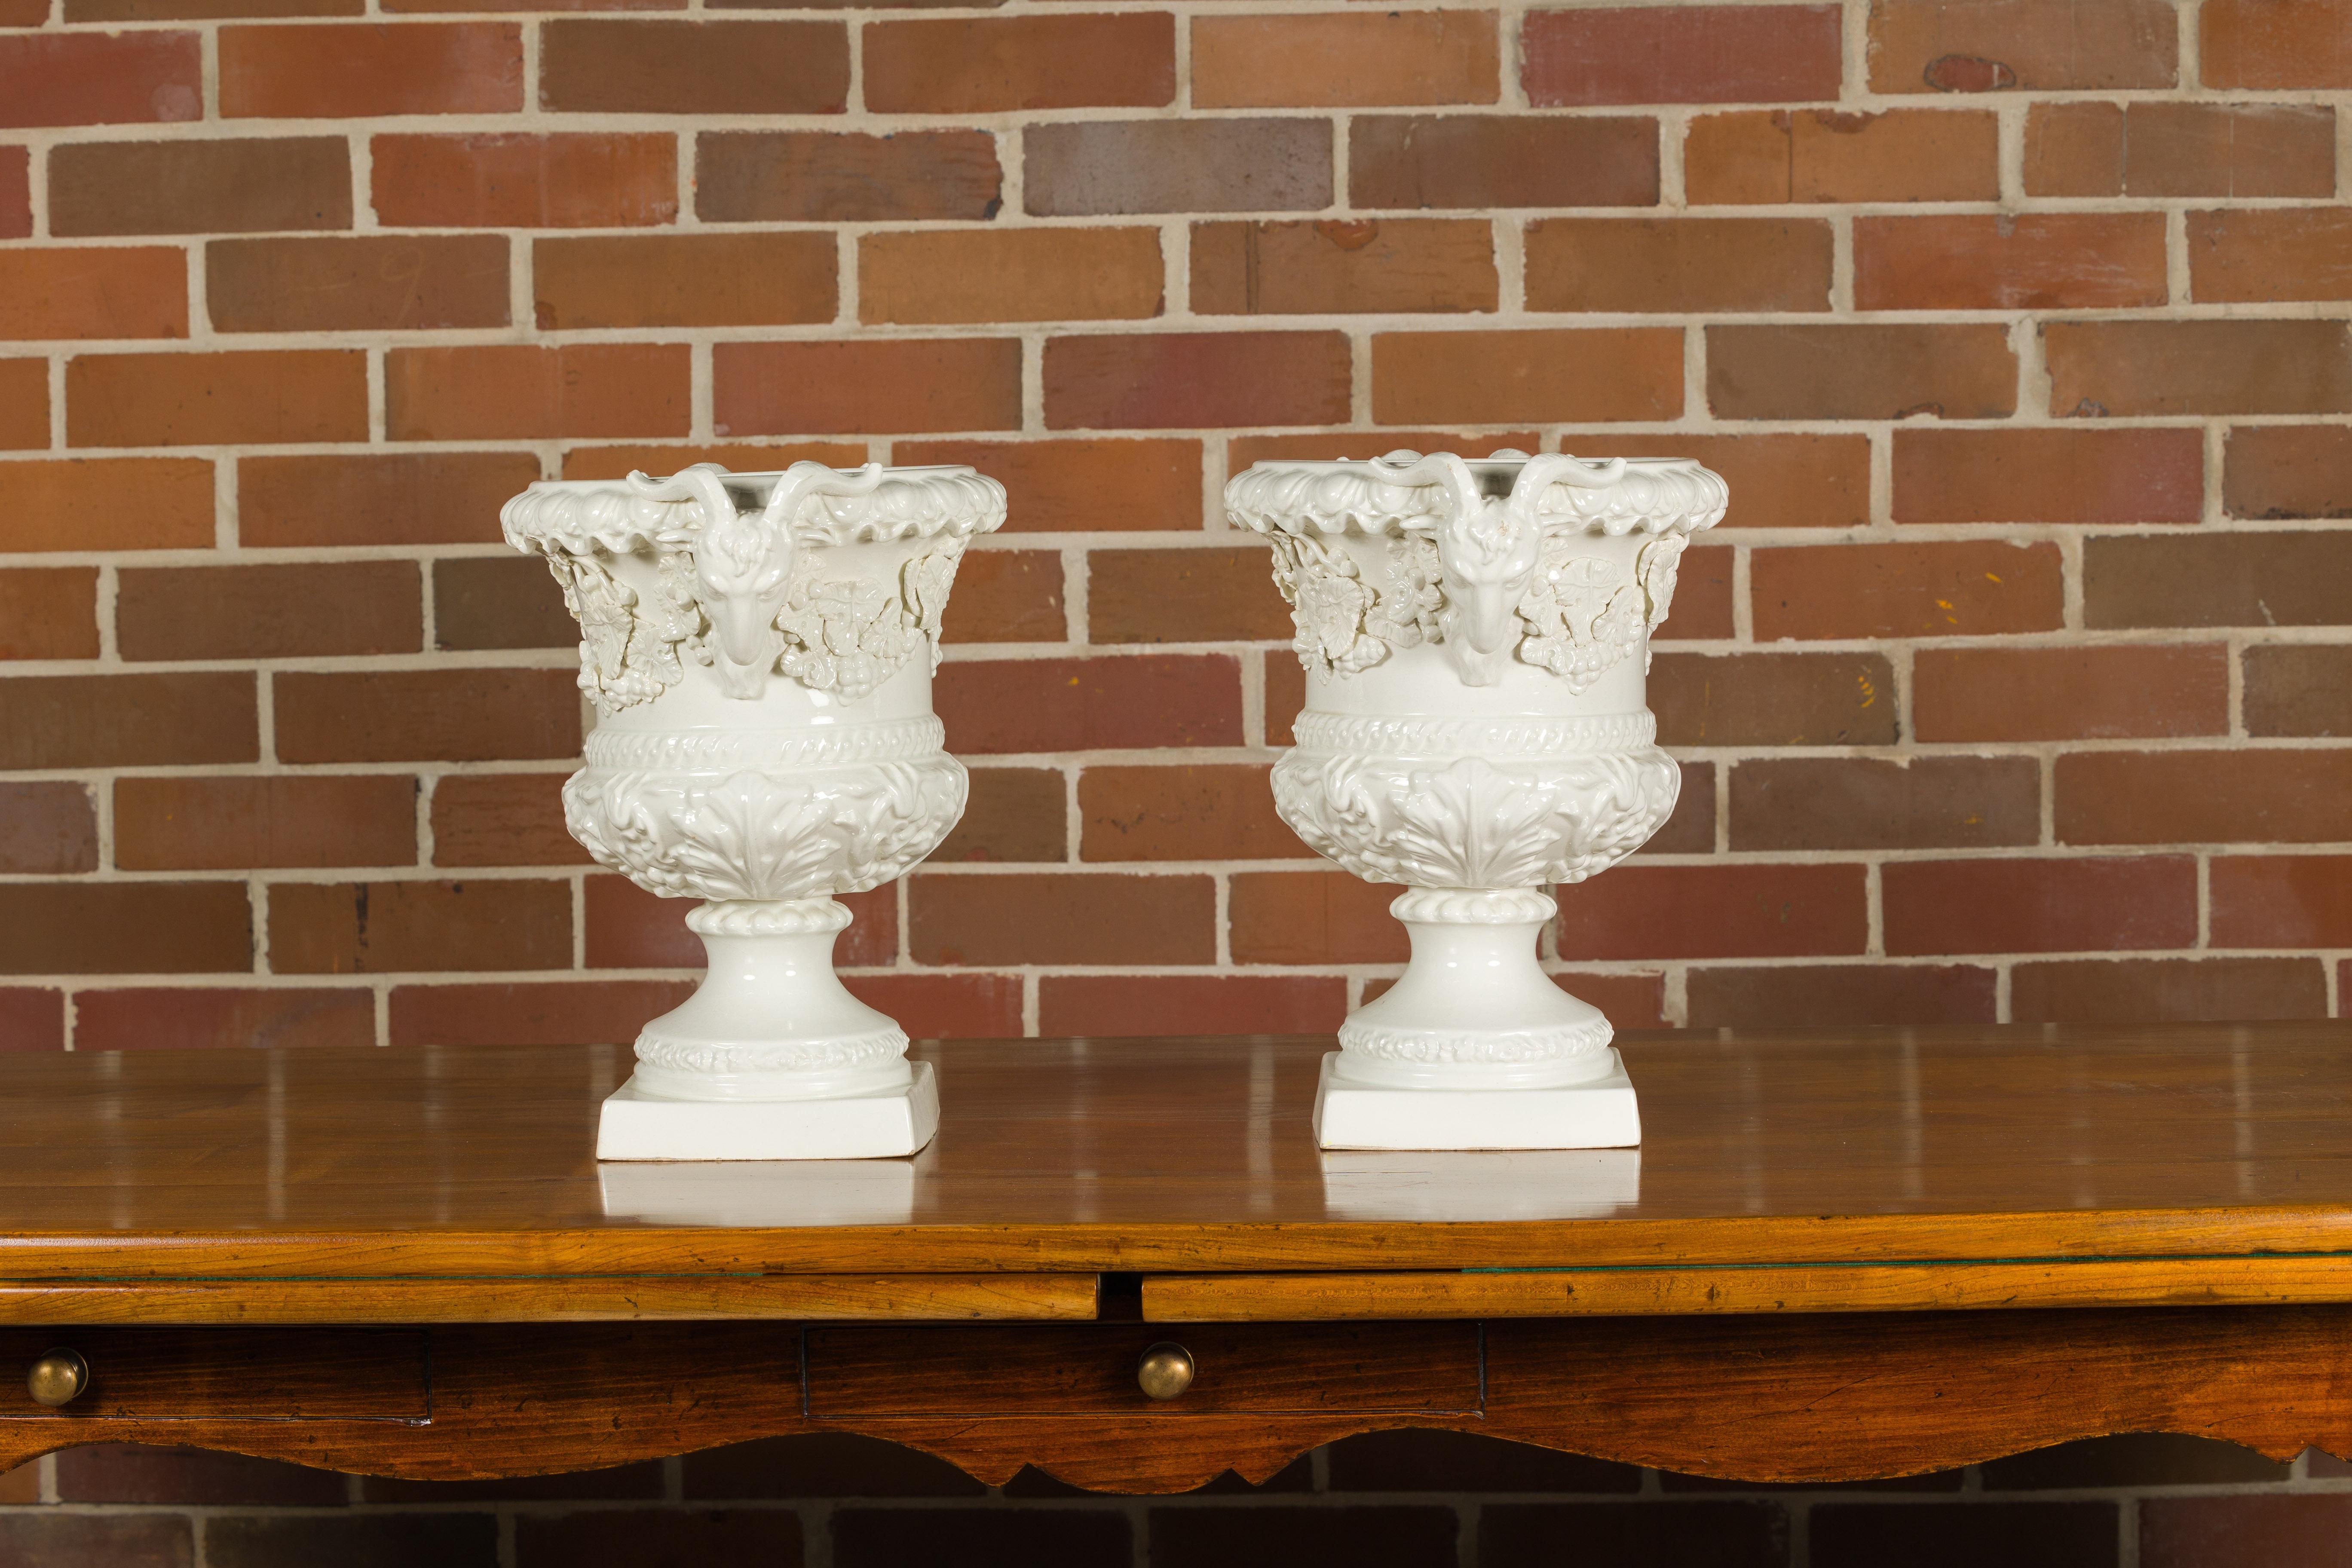 20th Century Pair of Blanc de Chine Midcentury Urns with Rams Heads and Ivy Leaves For Sale